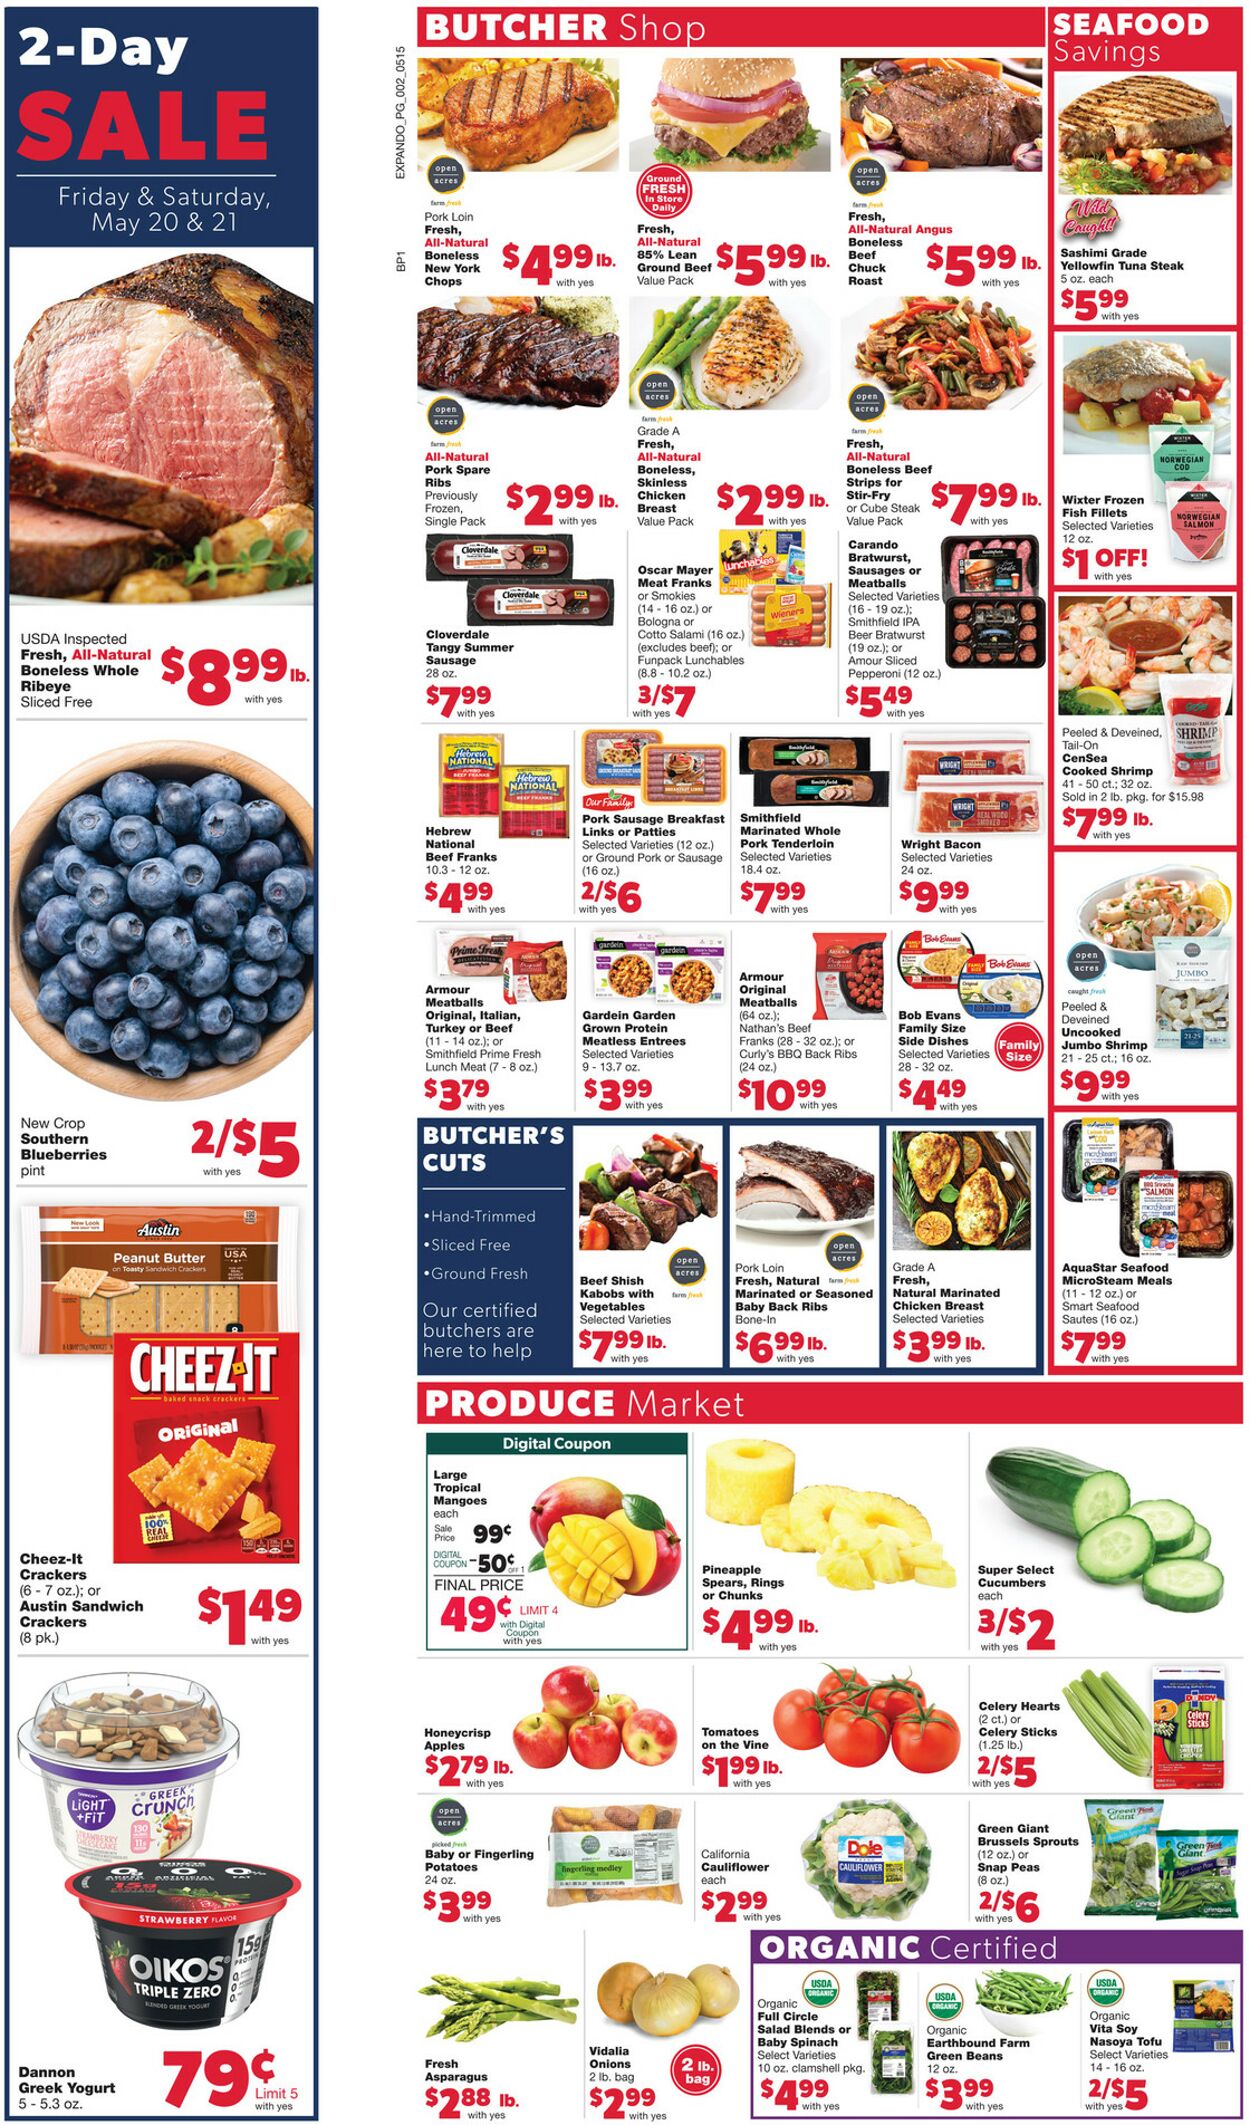 Weekly ad Family Fare 05/15/2022 - 05/21/2022